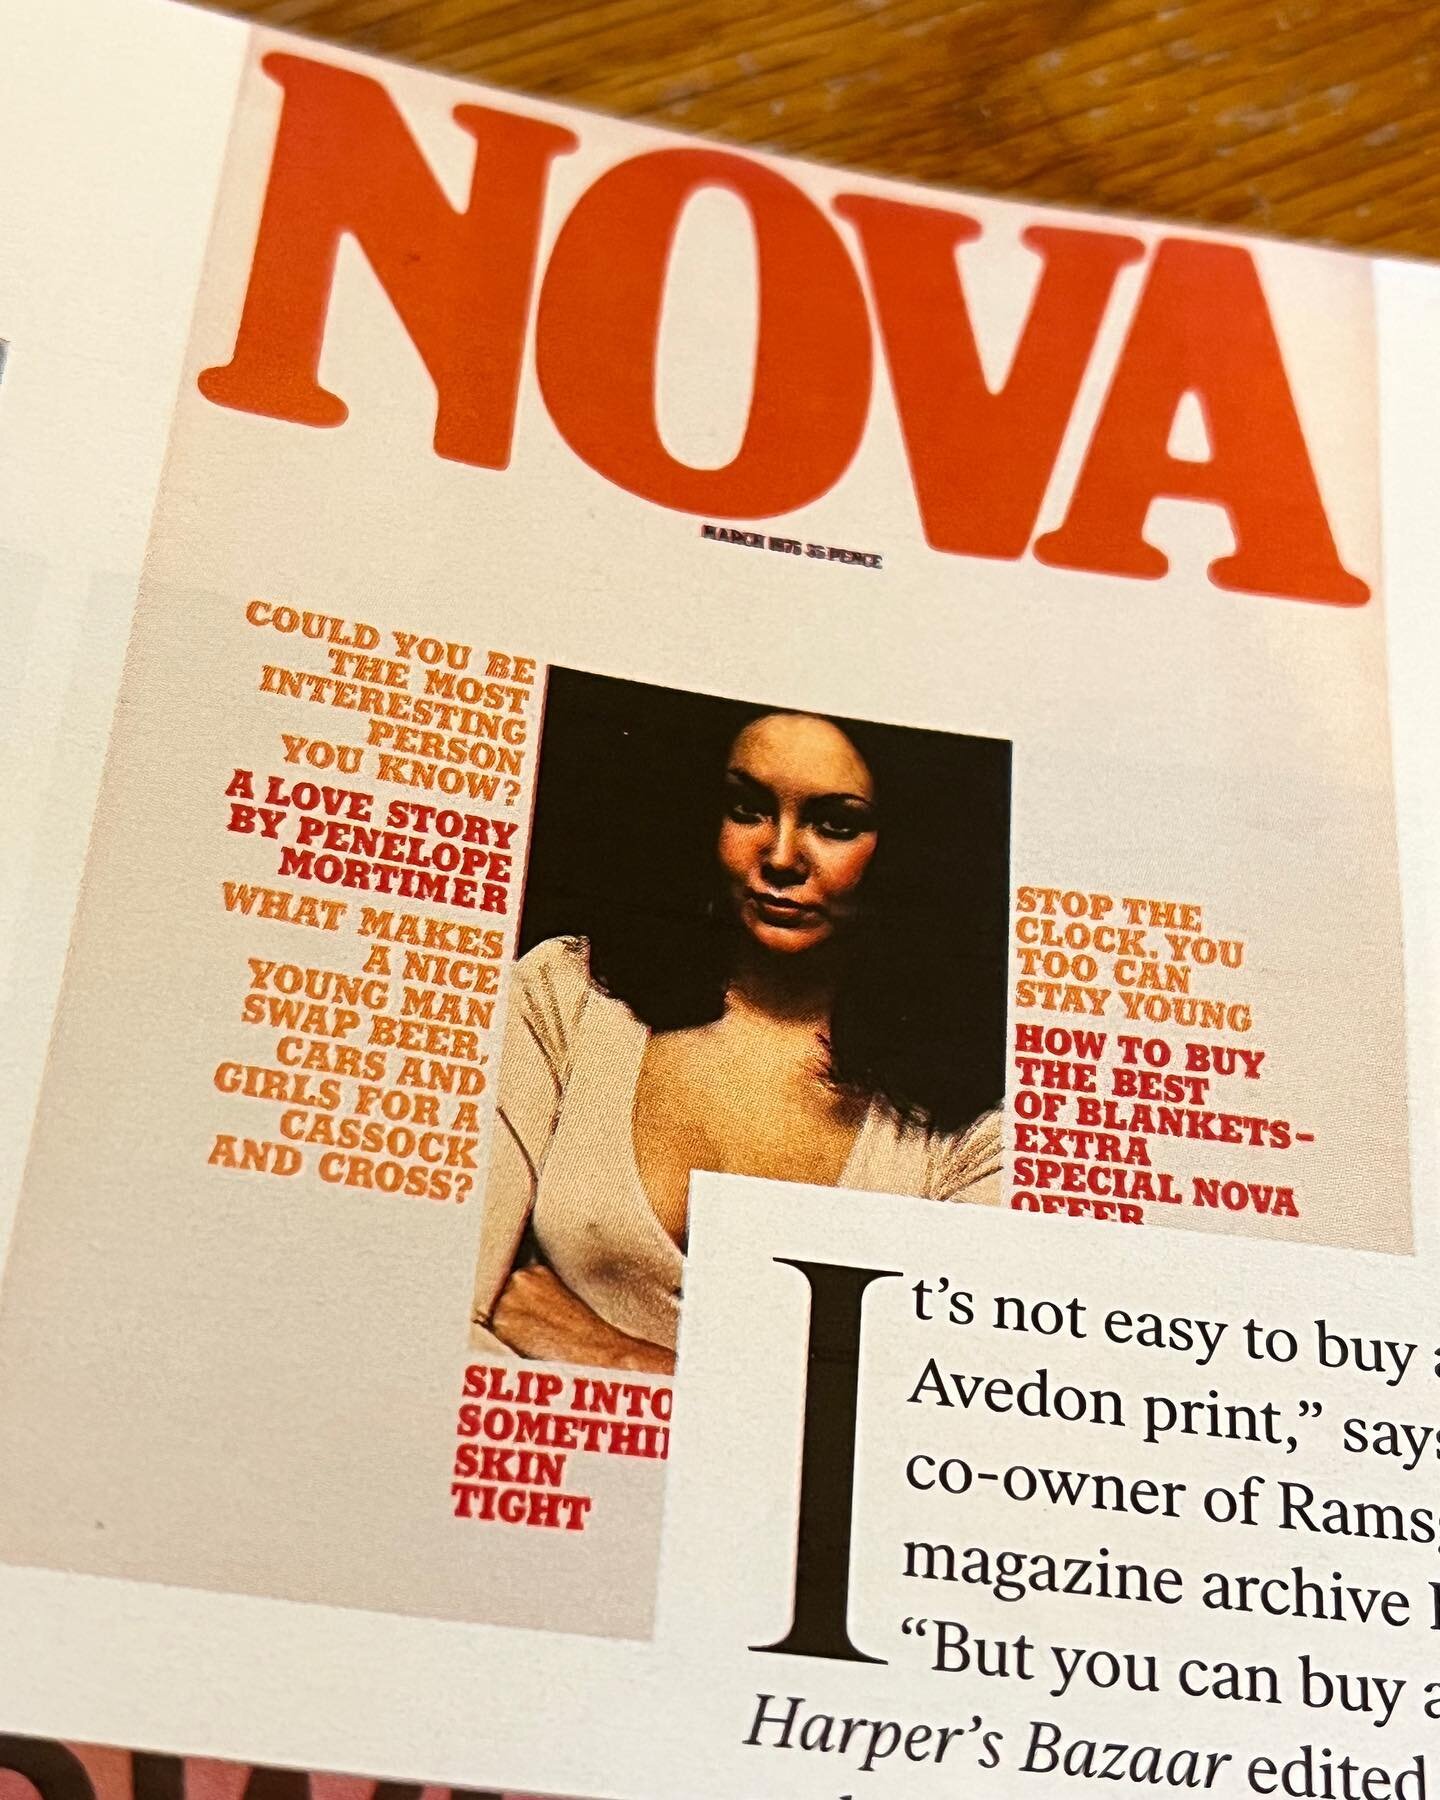 Oh how I wish I had kept my Nova magazines (and Vogues) bought at Ayr bus station on my way to school. Nova felt so radical and sophisticated in one @fthtsi